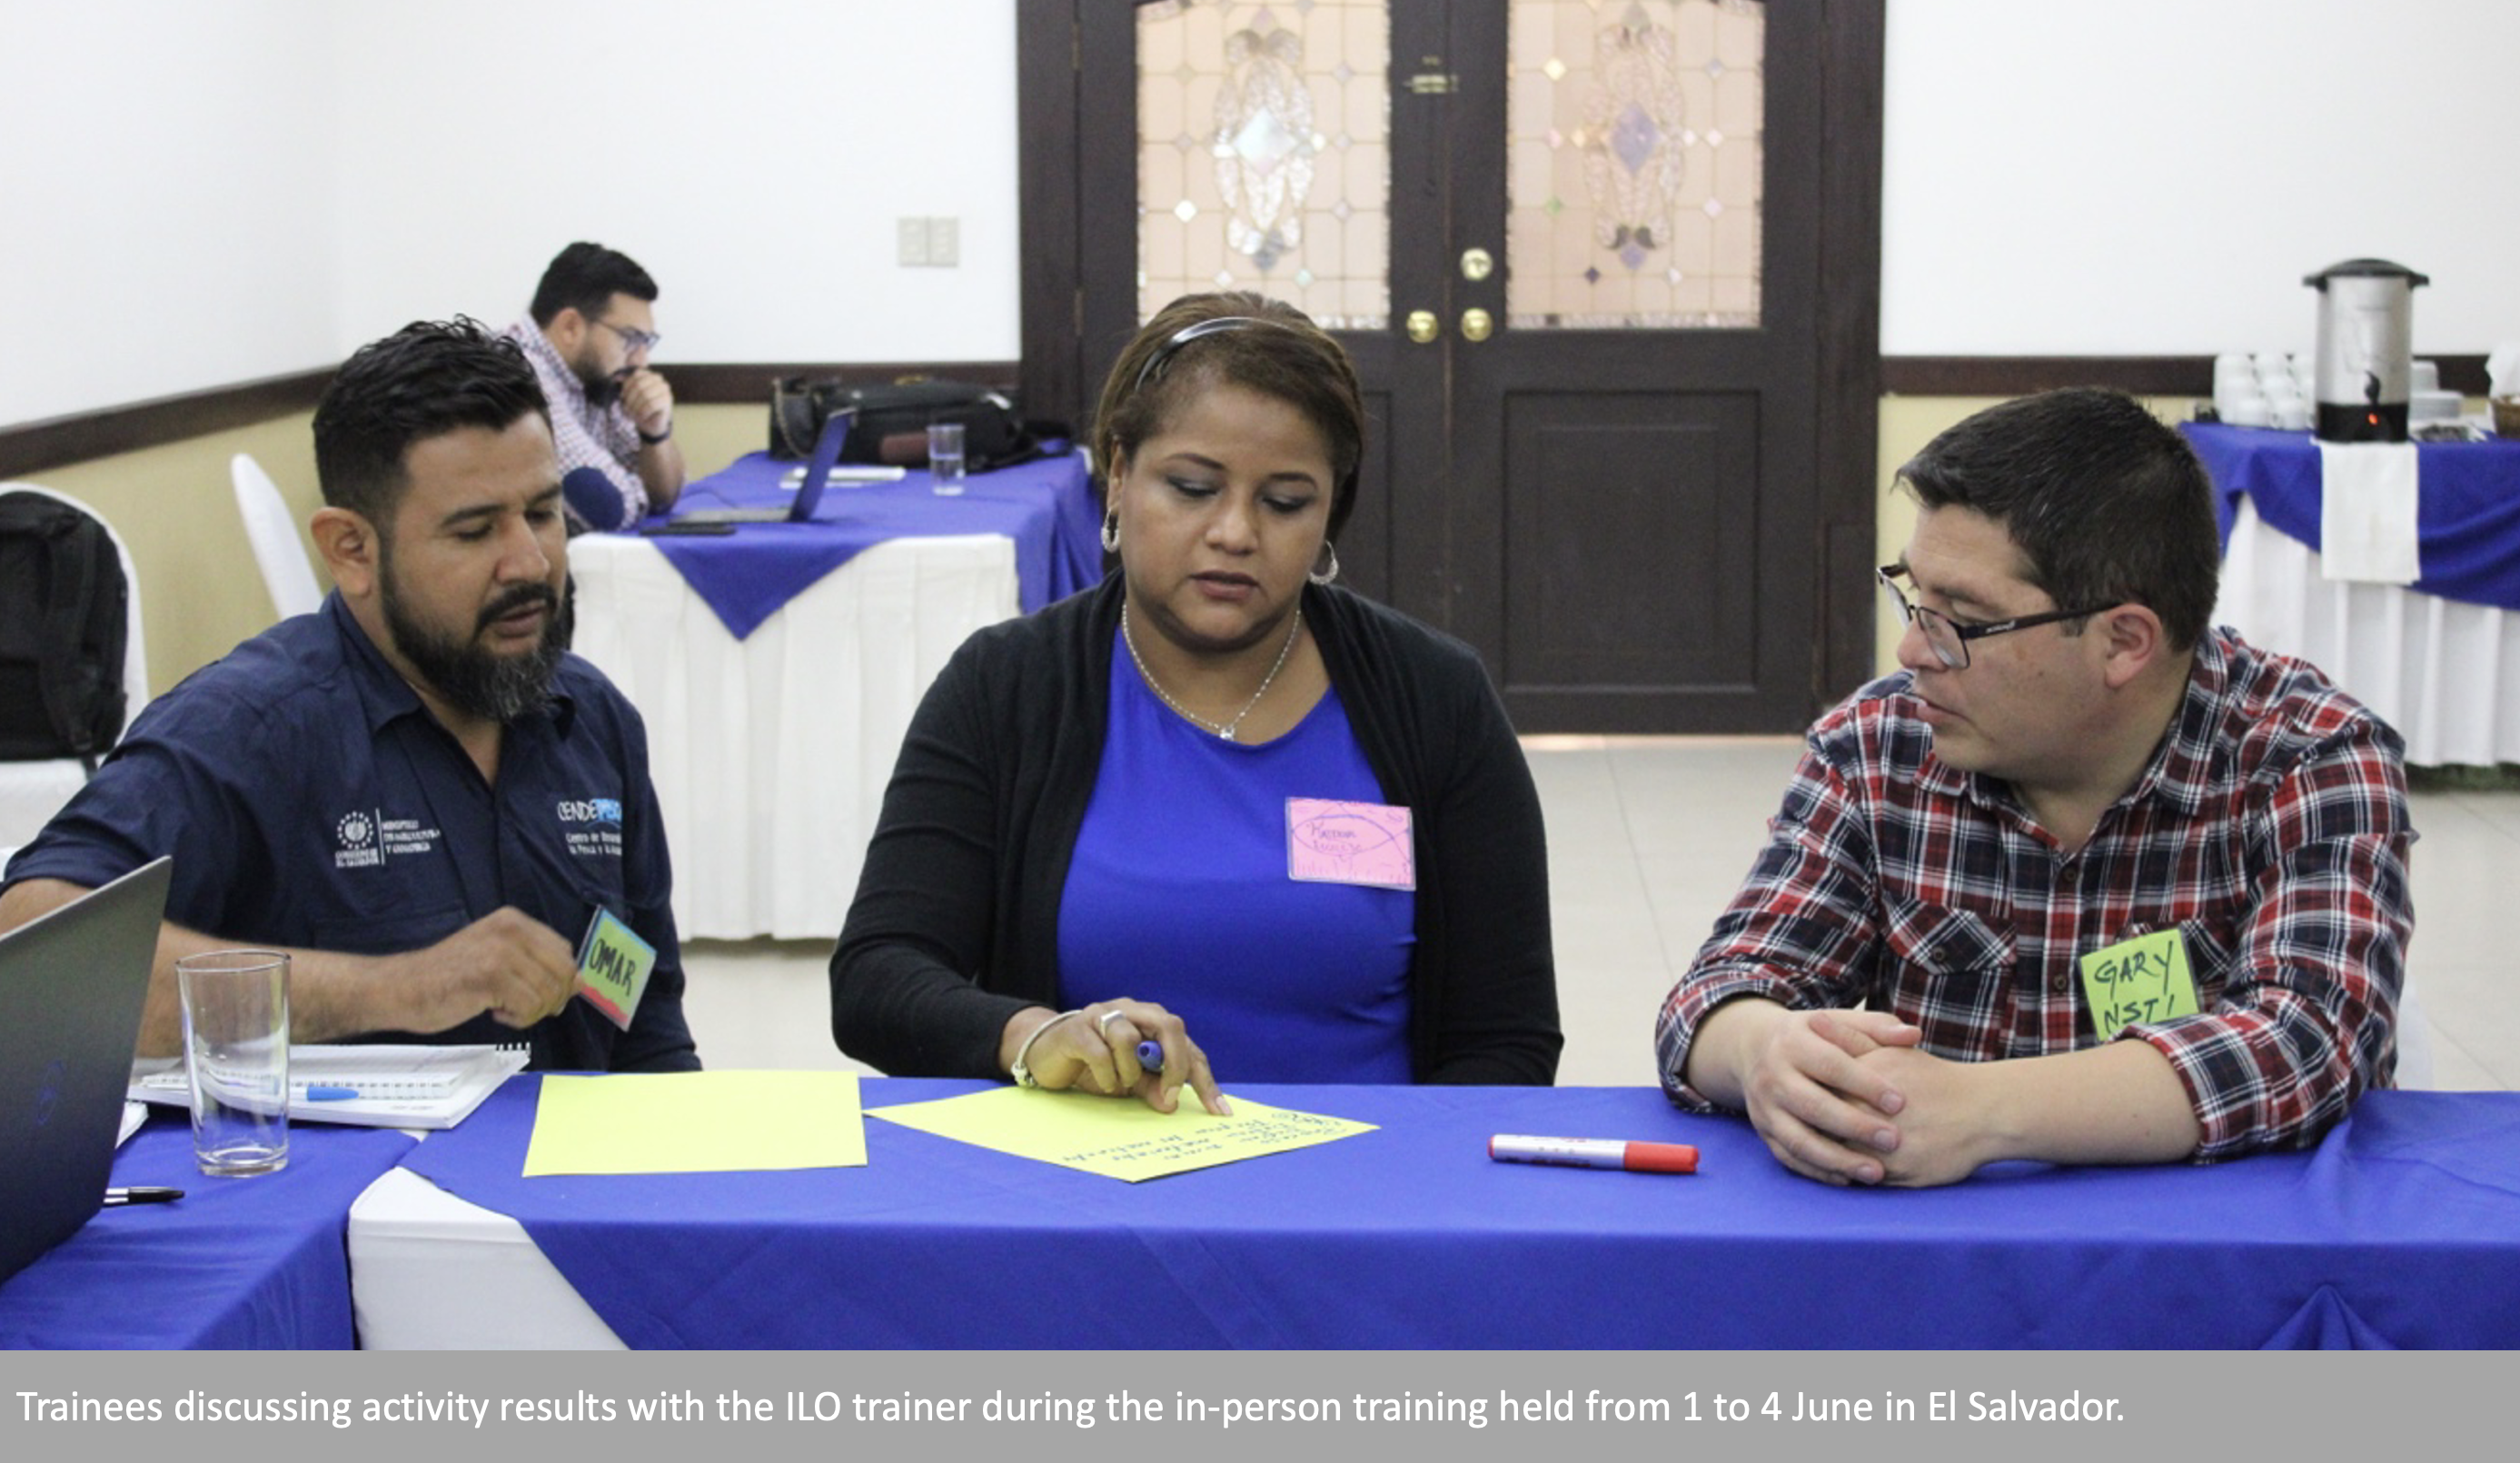 UNIDO and ILO provide training to strengthen aquaculture value chains of Latin America and Caribbean